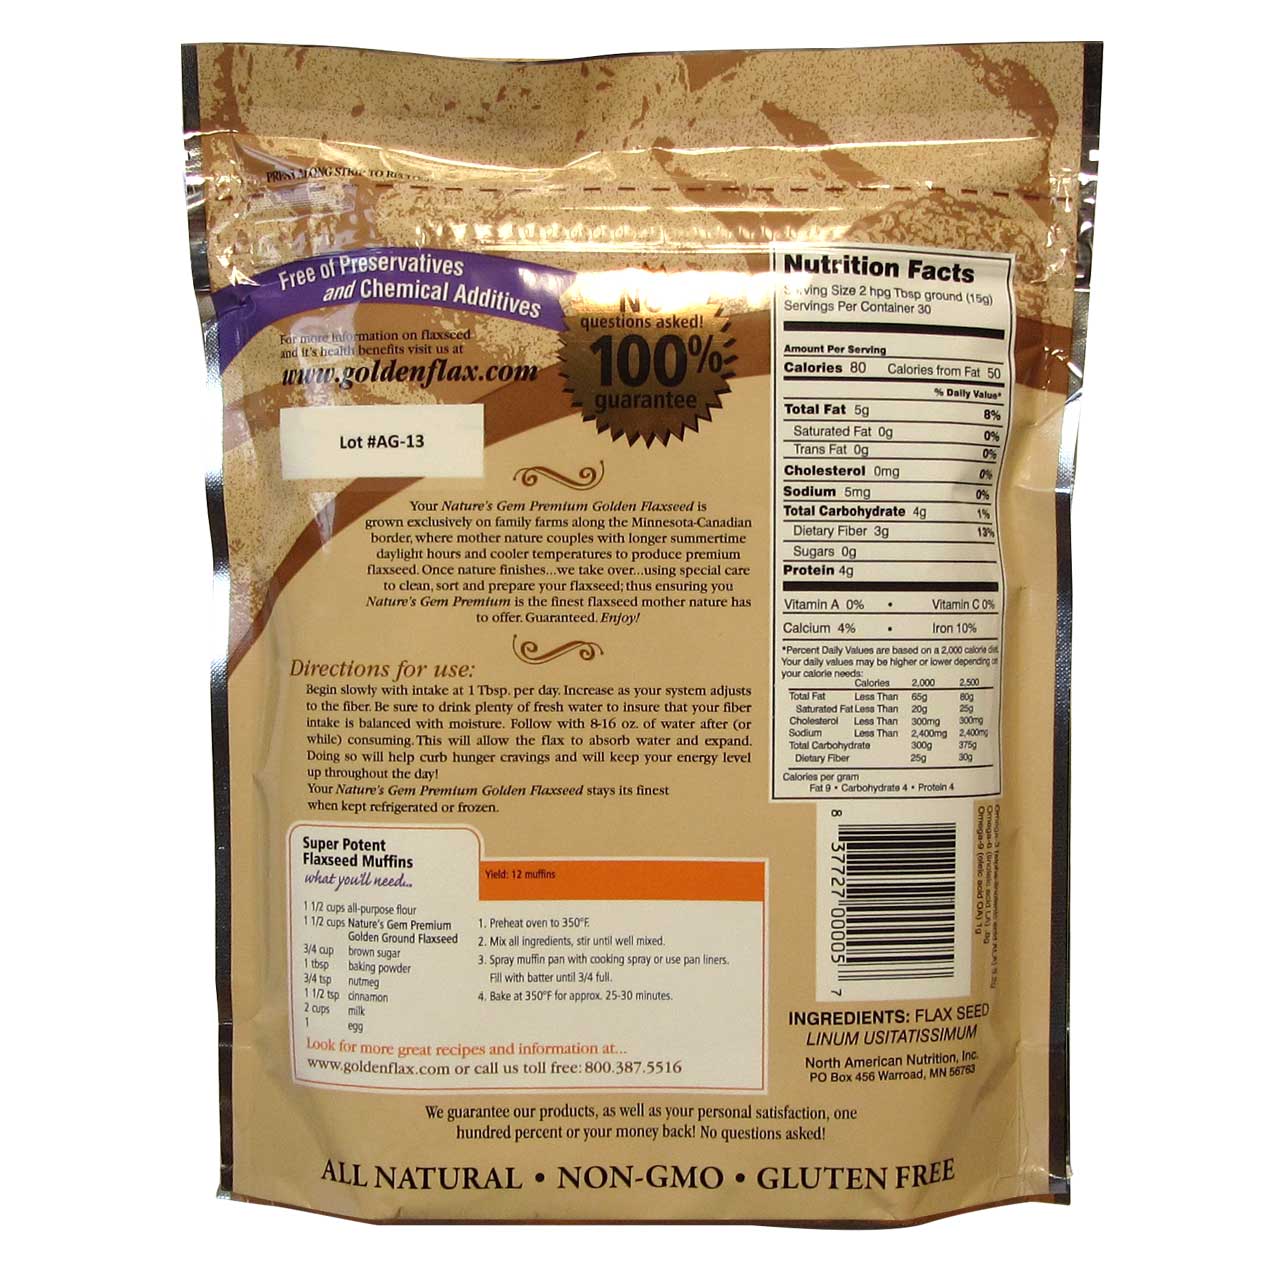 Back of Our Preservative and Chemical Free, Farm-to-Table Golden Flaxseed Bag